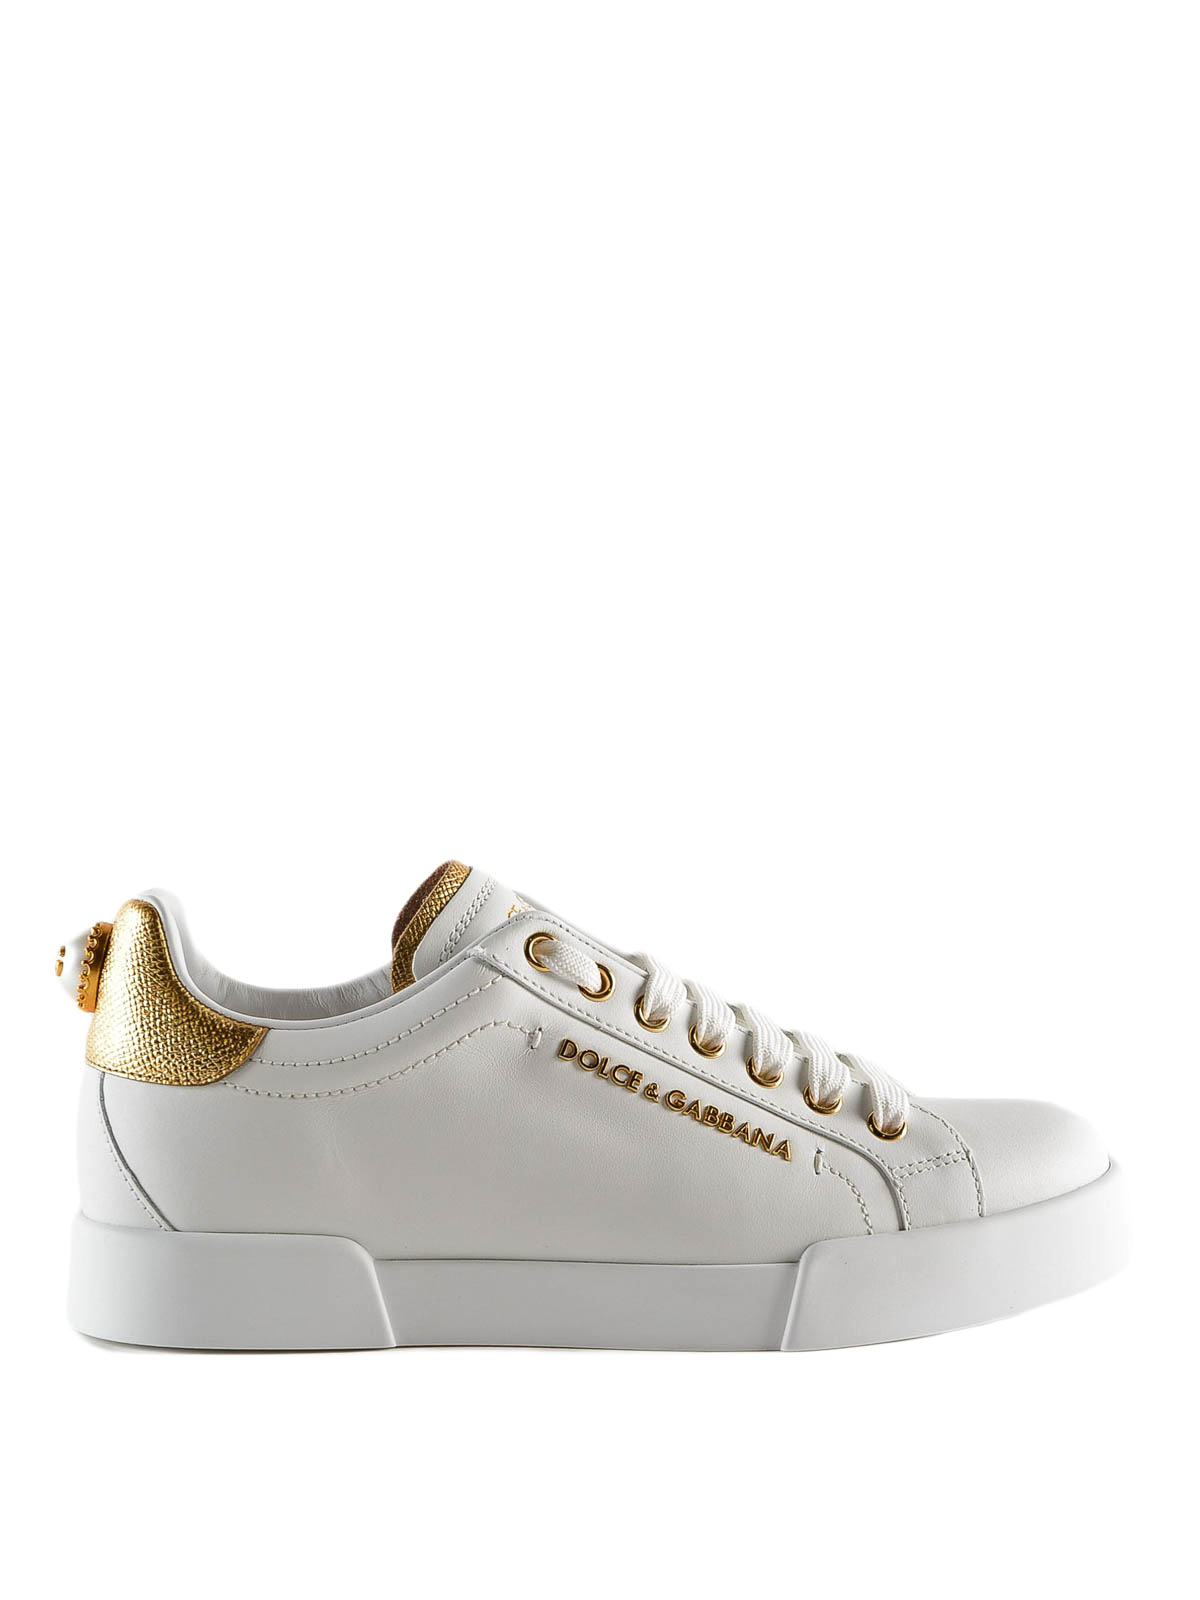 Dolce & Gabbana Logo Pearl White Leather Sneakers In Blanco